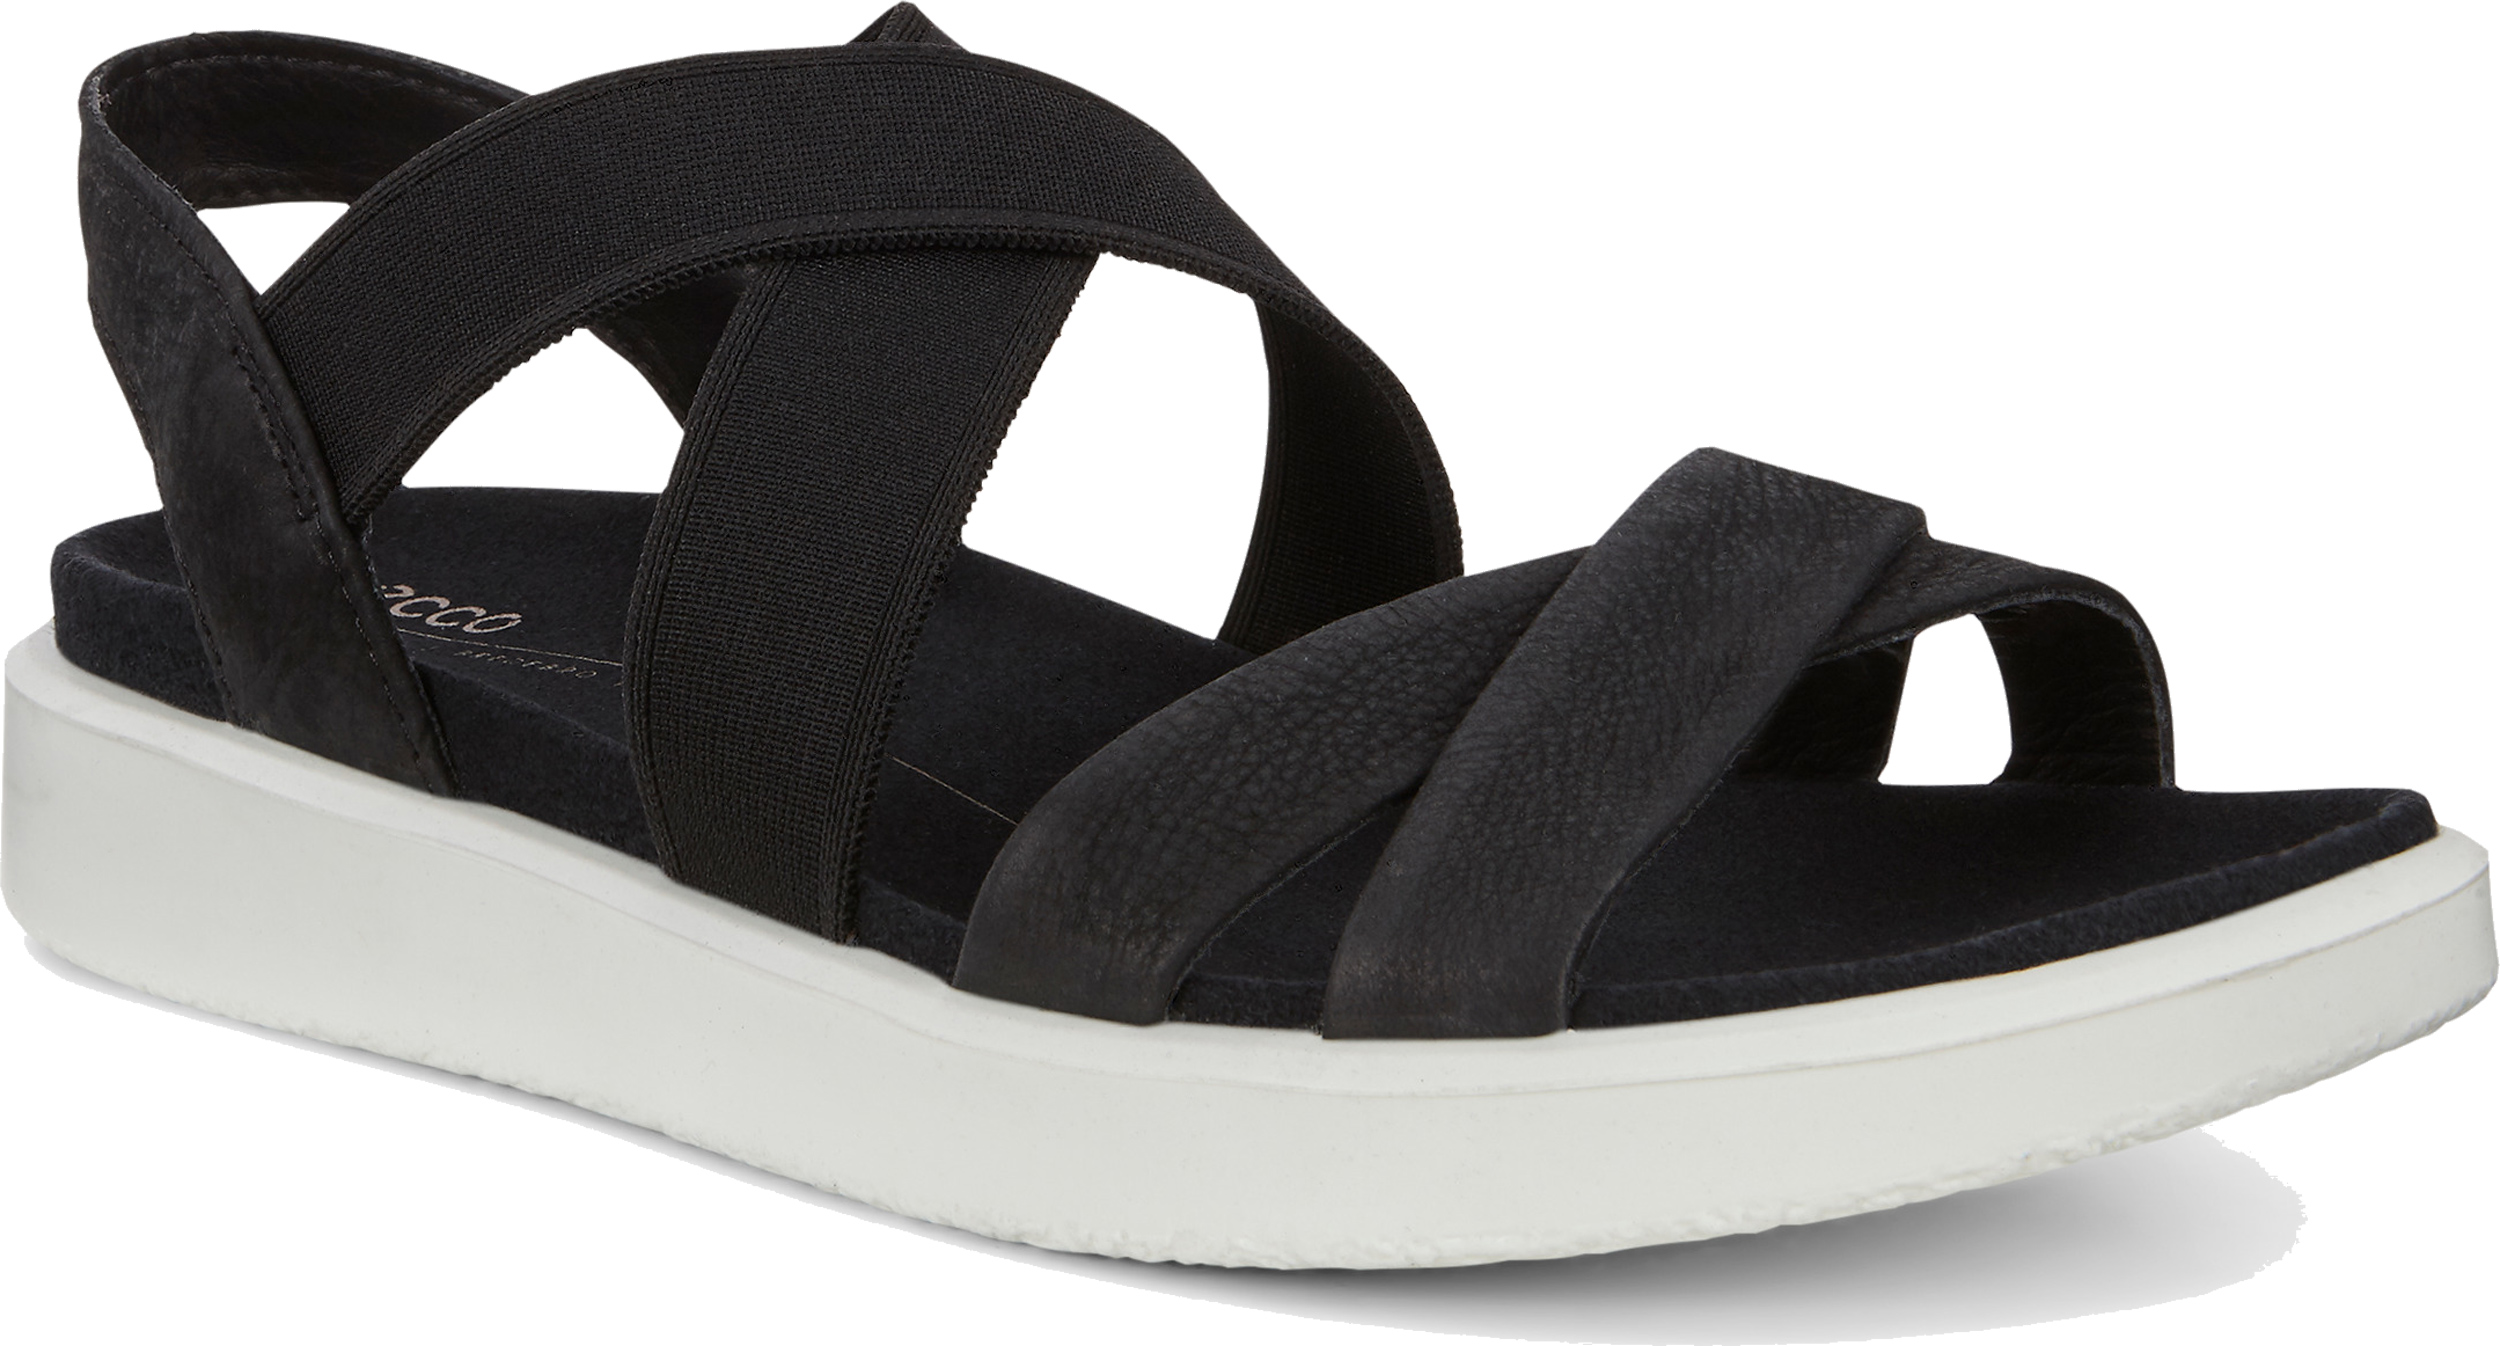 Ecco Sandals | UK Stock, Shipped from Cornwall - SandalShop